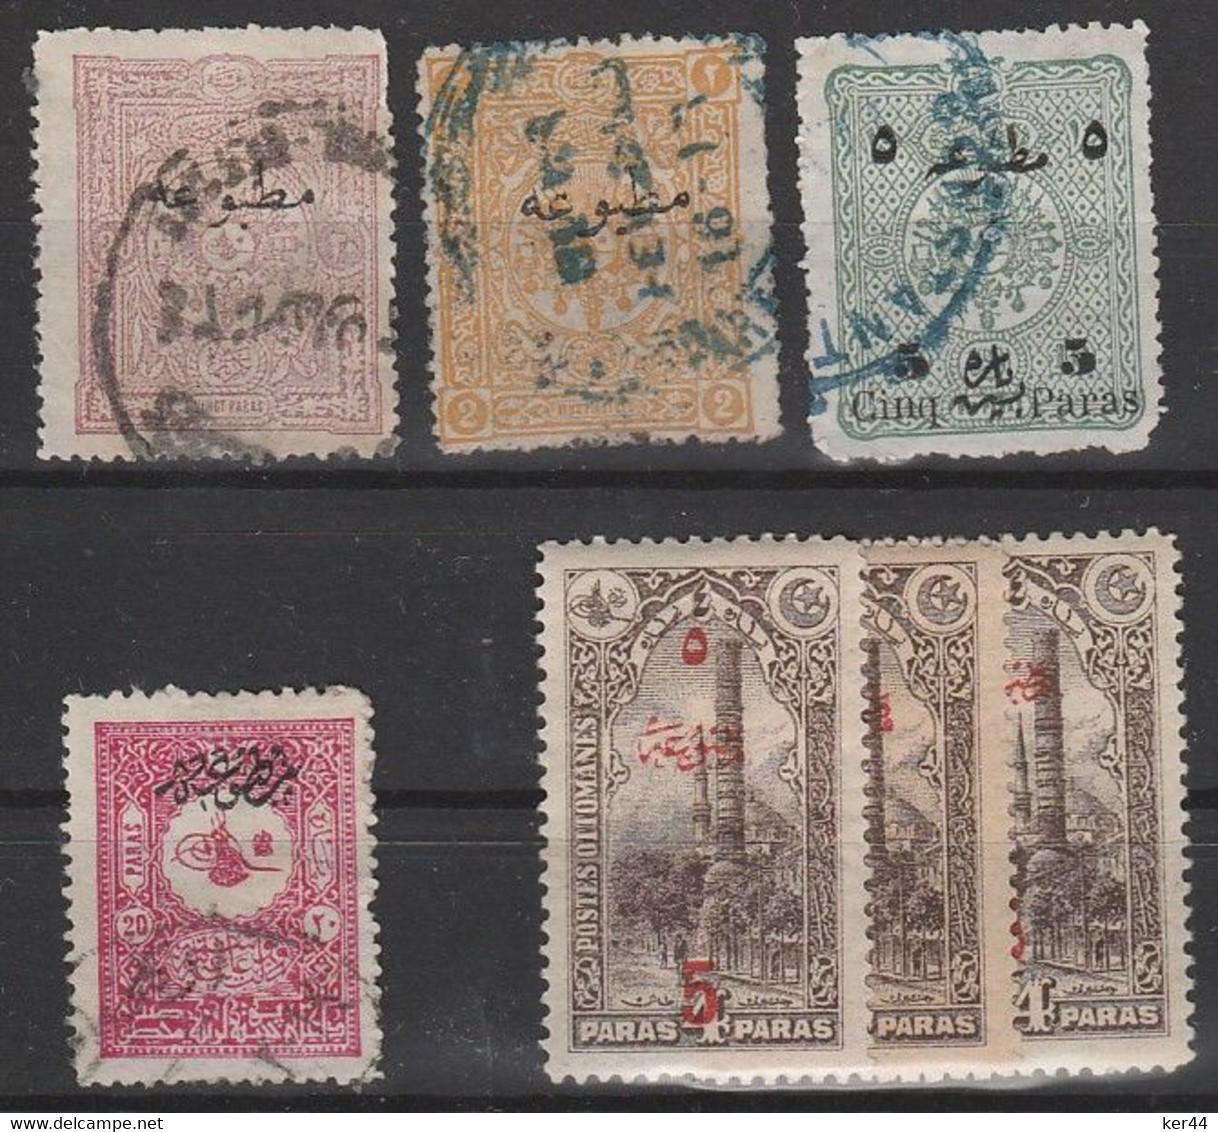 Journaux_Lot De 7 Timbres **/*/O -  Newspaper Stamps Lot_MNH/MH/USED - Newspaper Stamps